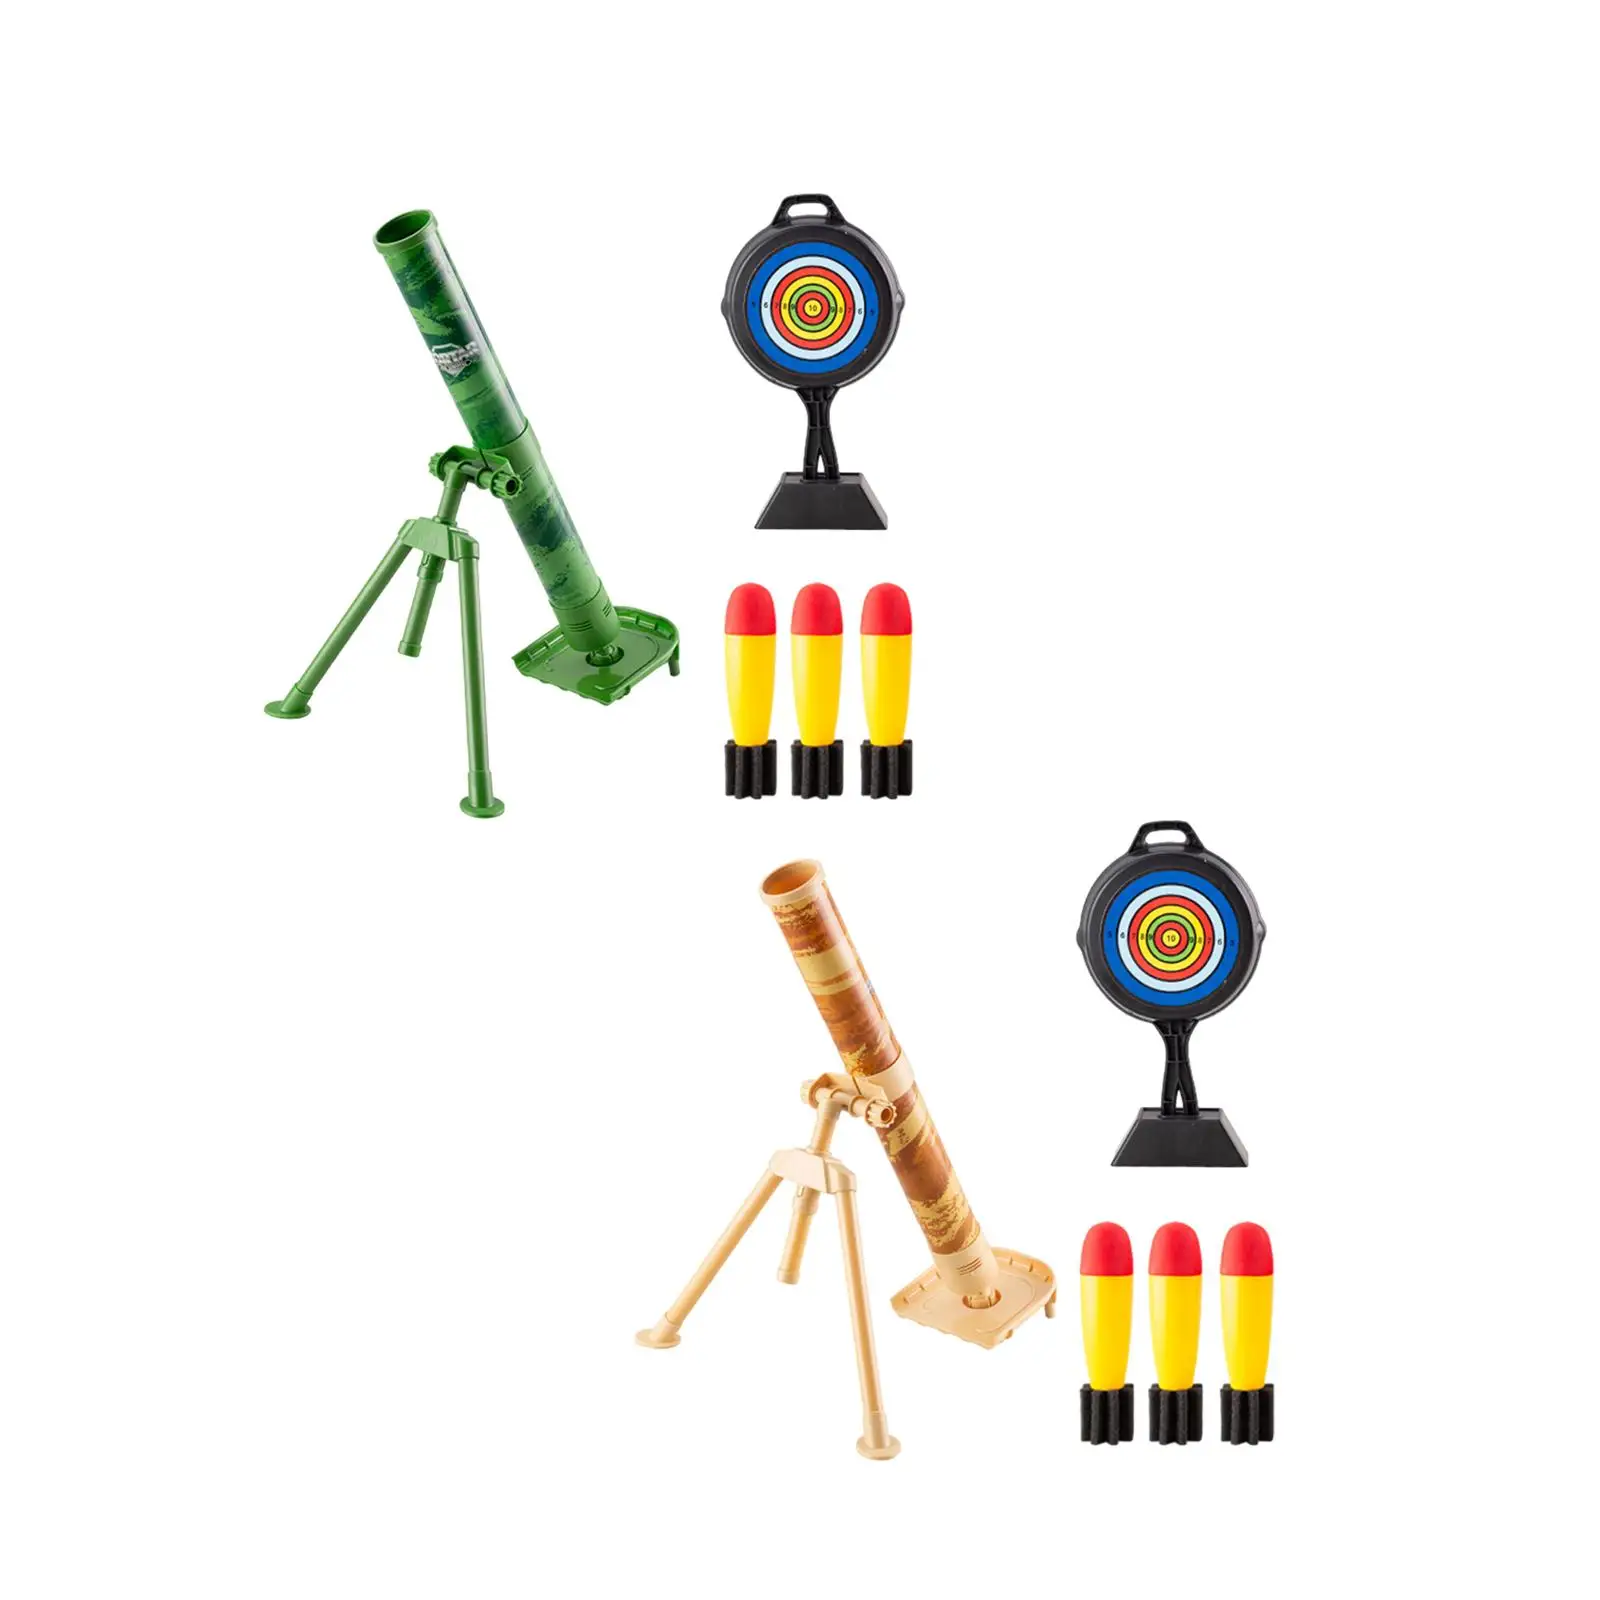 Mortar Launcher Toys Best Gift Great for Outdoor Loading Bucket Rocket Launcher Set for Kids Boys and Girls Festival Gifts